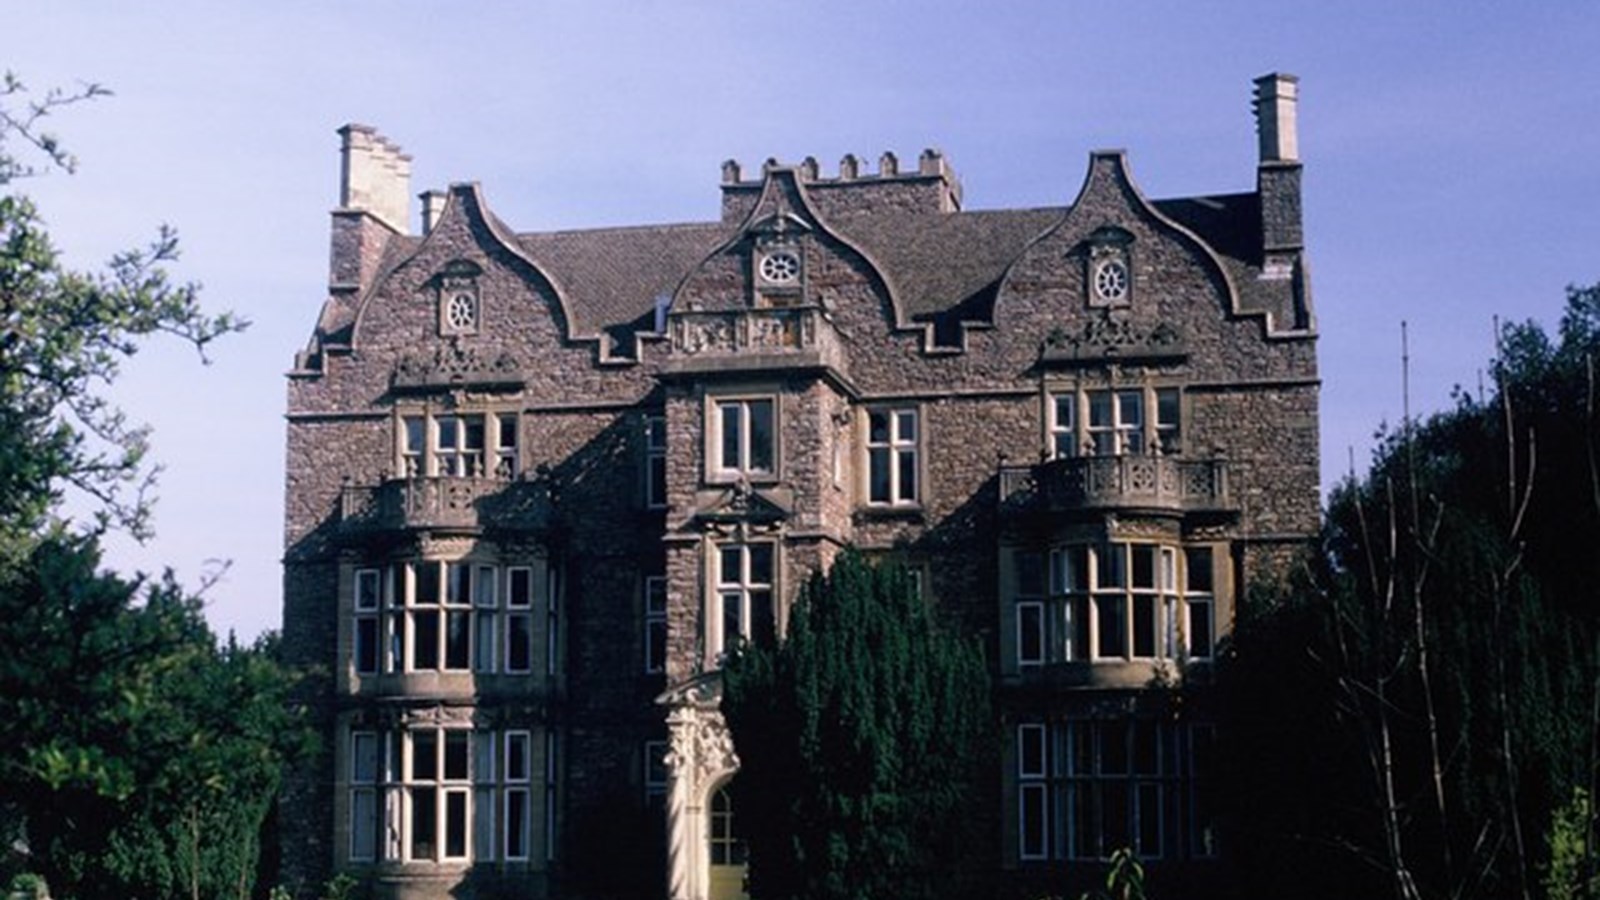 a photograph of a medium sized country house. It has 3 storeys, a protruding room on the front elevation and single bay windows on either side